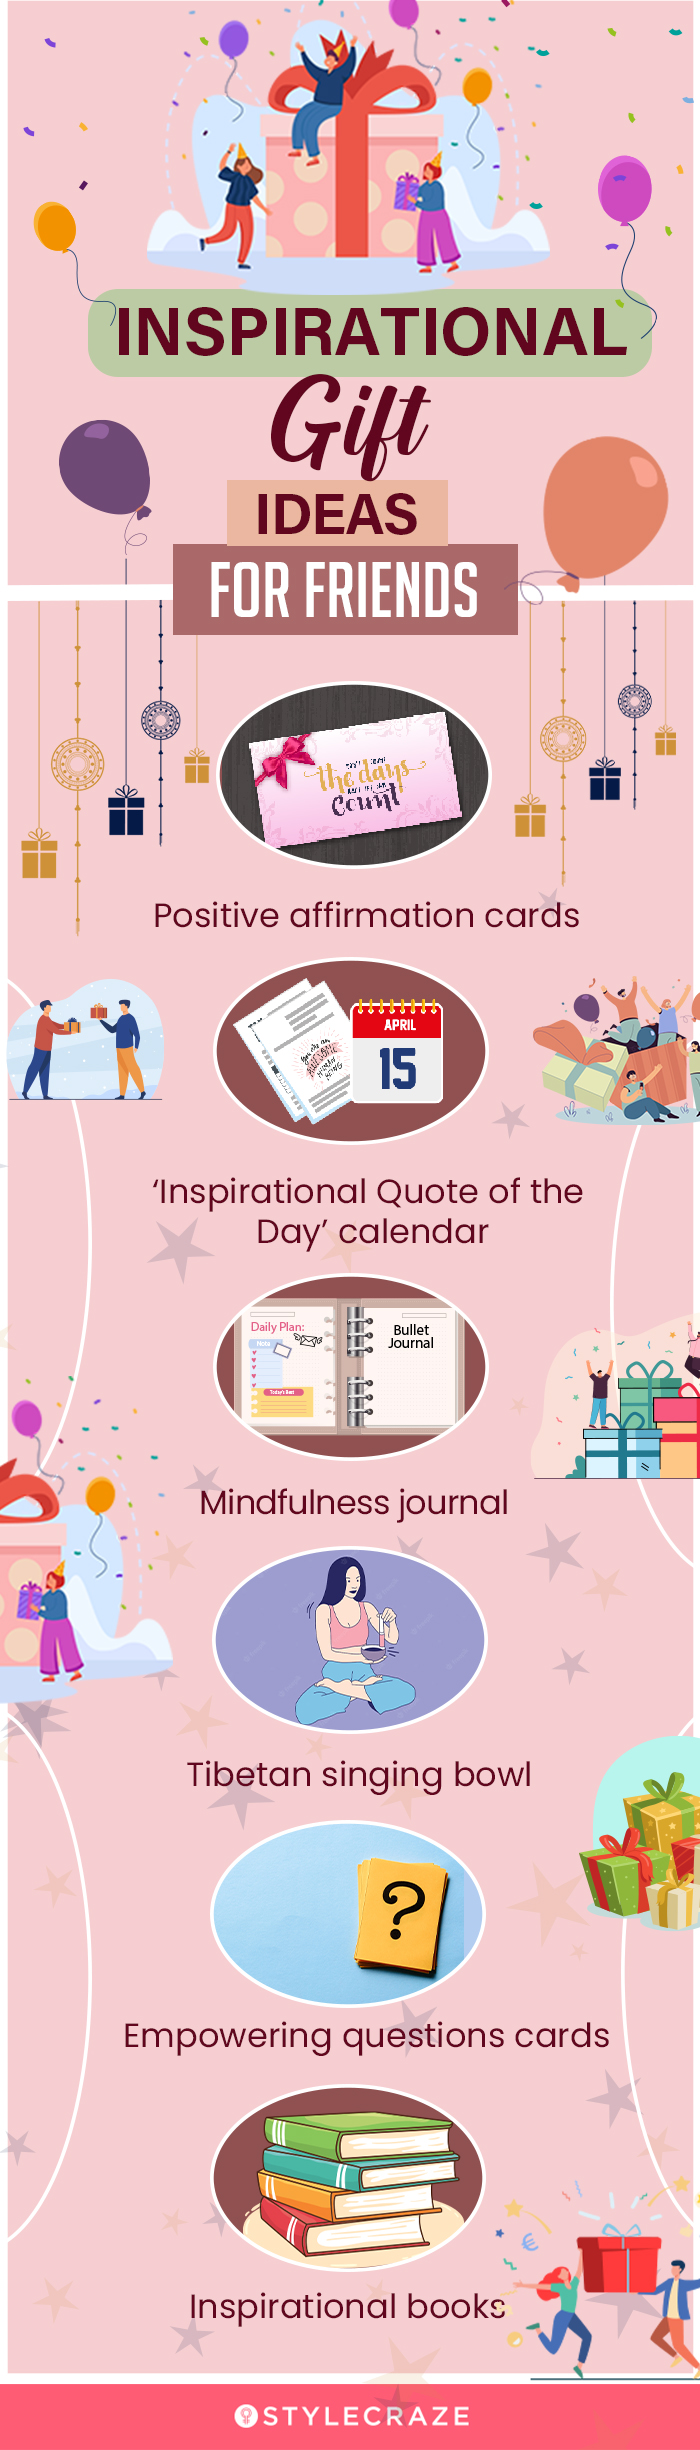 inspitational gift ideas for friends (infographic)